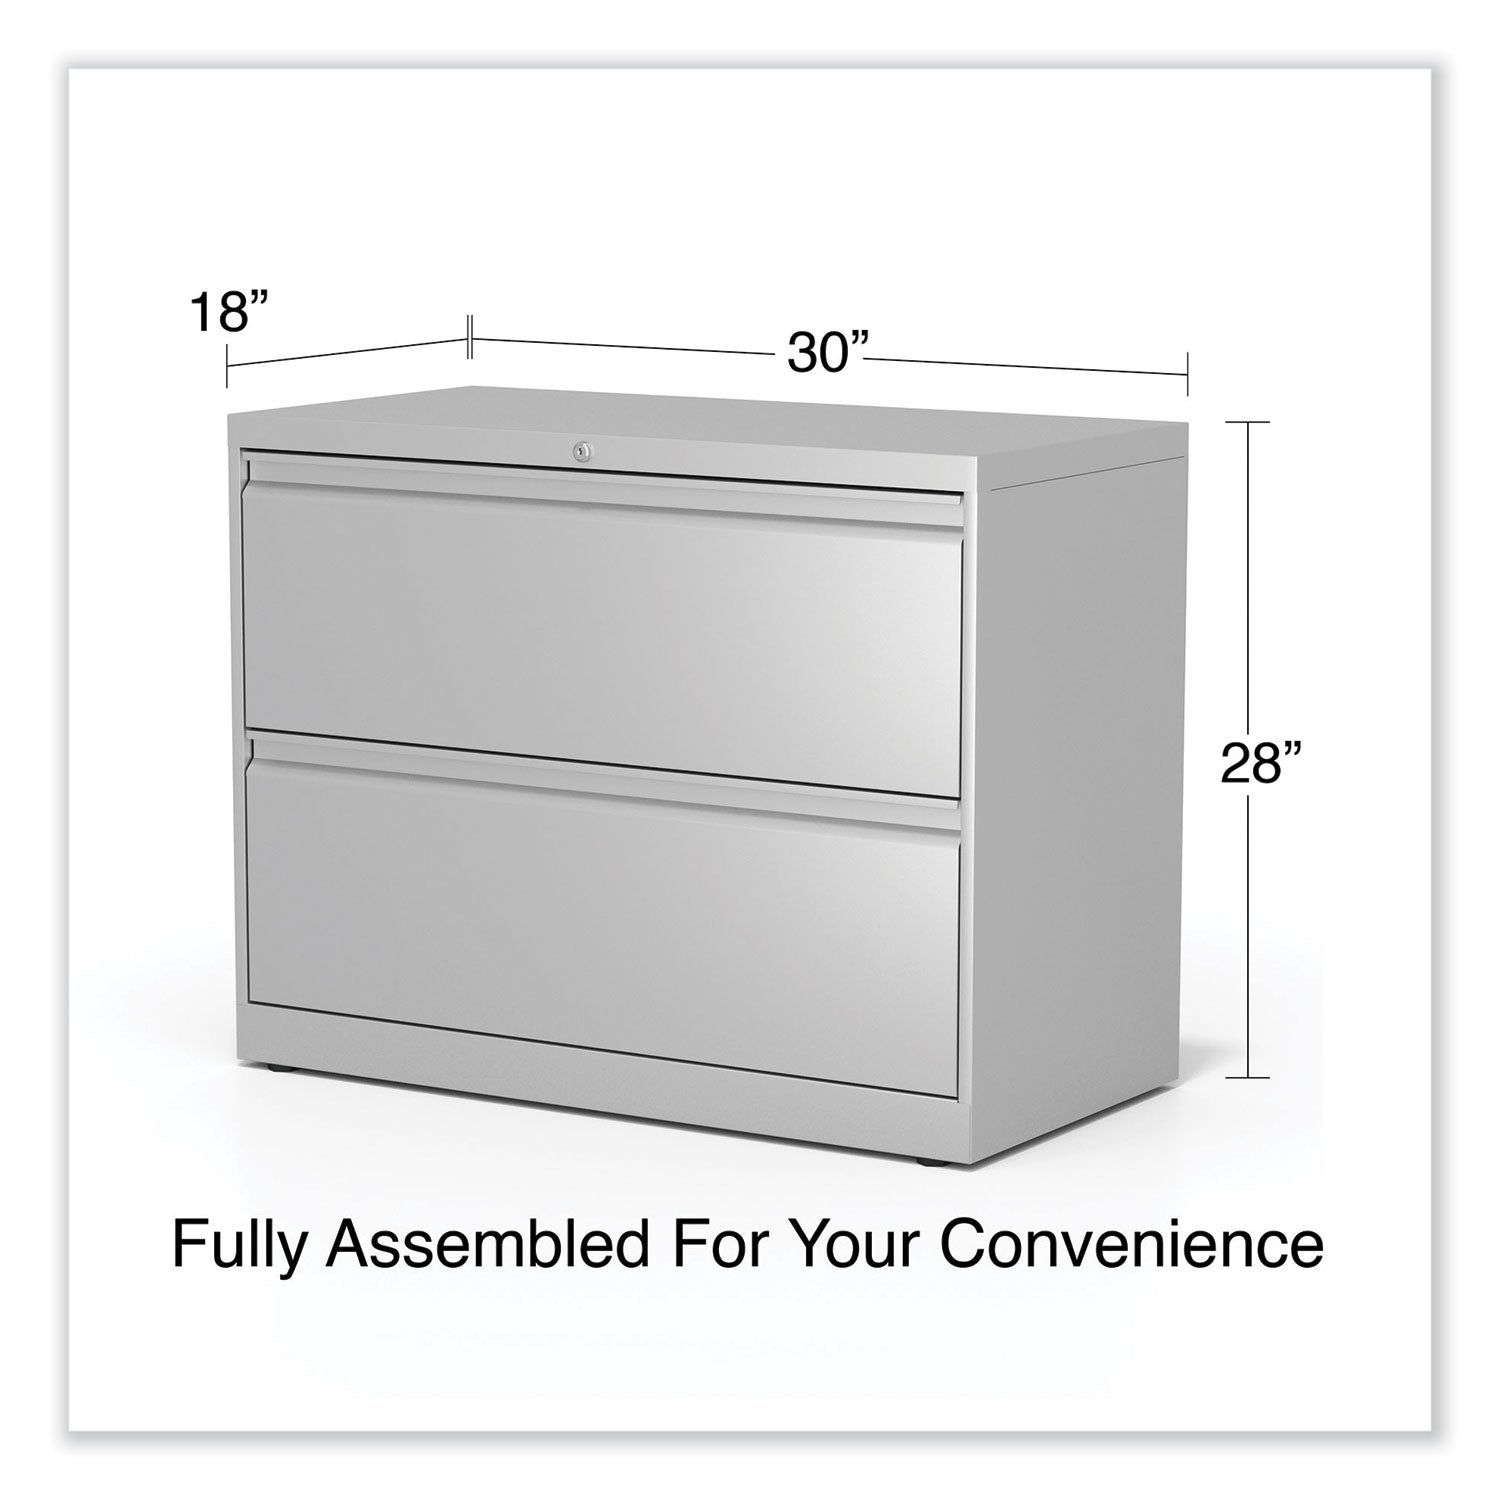 lateral-file-2-legal-letter-size-file-drawers-light-gray-36-x-1863-x-28_alehlf3629lg - 6